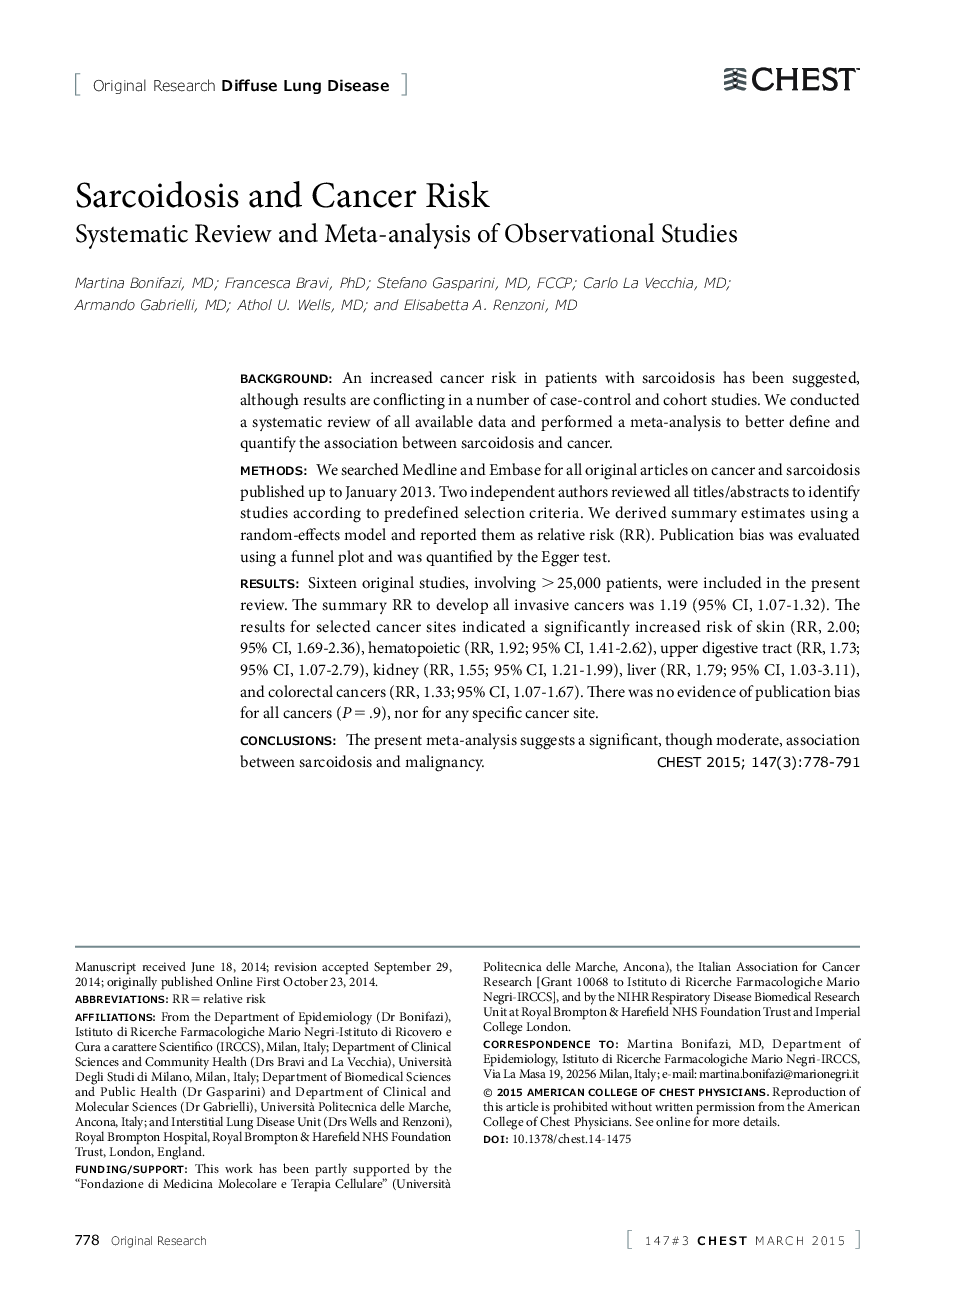 Sarcoidosis and Cancer Risk : Systematic Review and Meta-analysis of Observational Studies